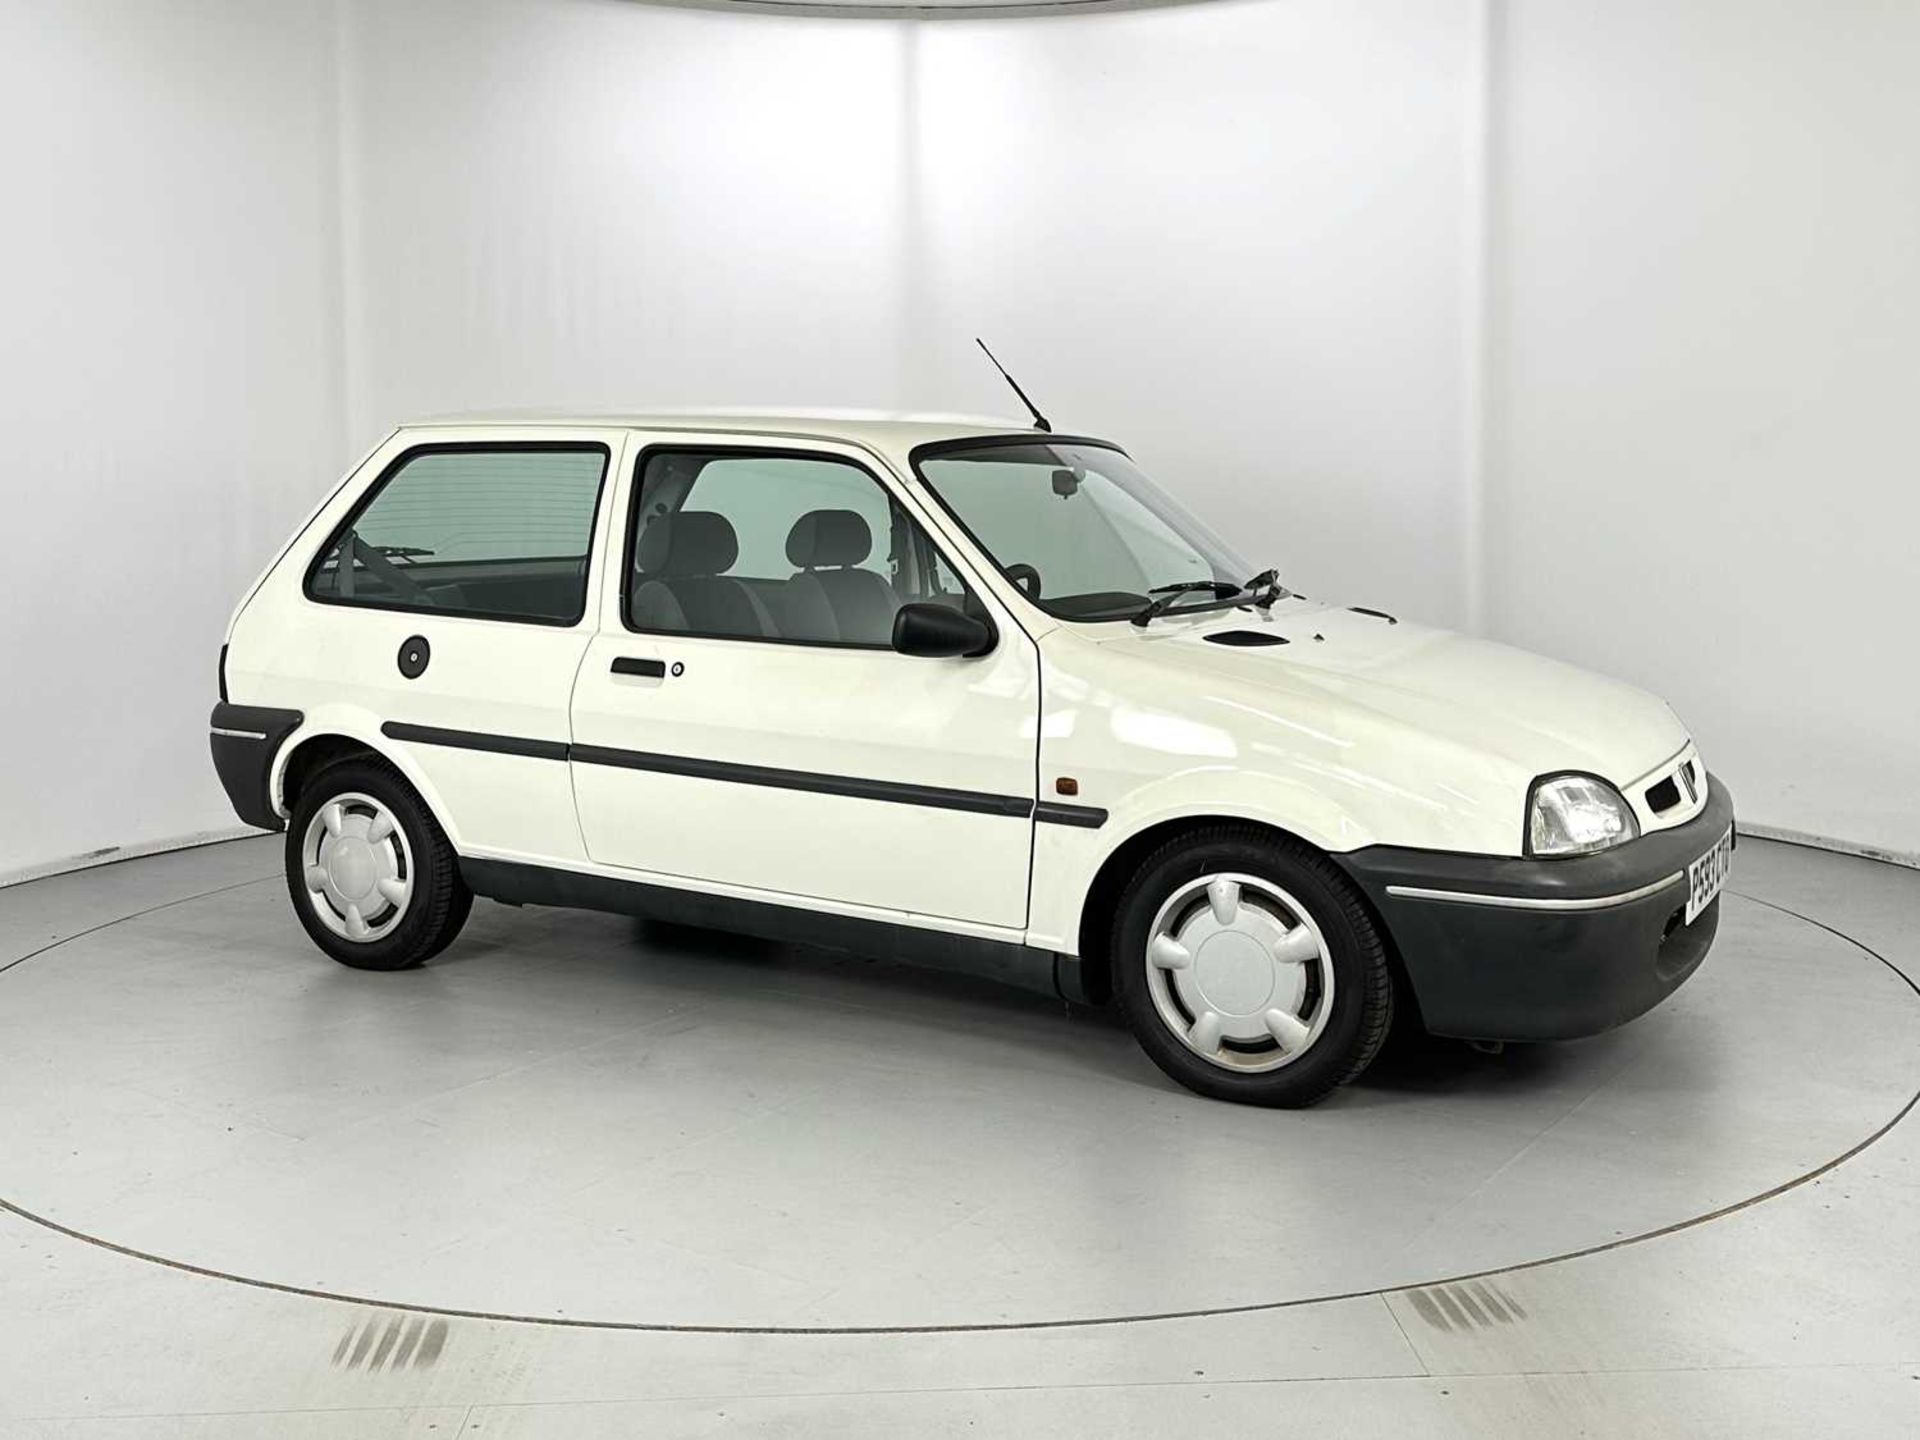 1996 Rover Metro - NO RESERVE 13,000 miles! - Image 12 of 29